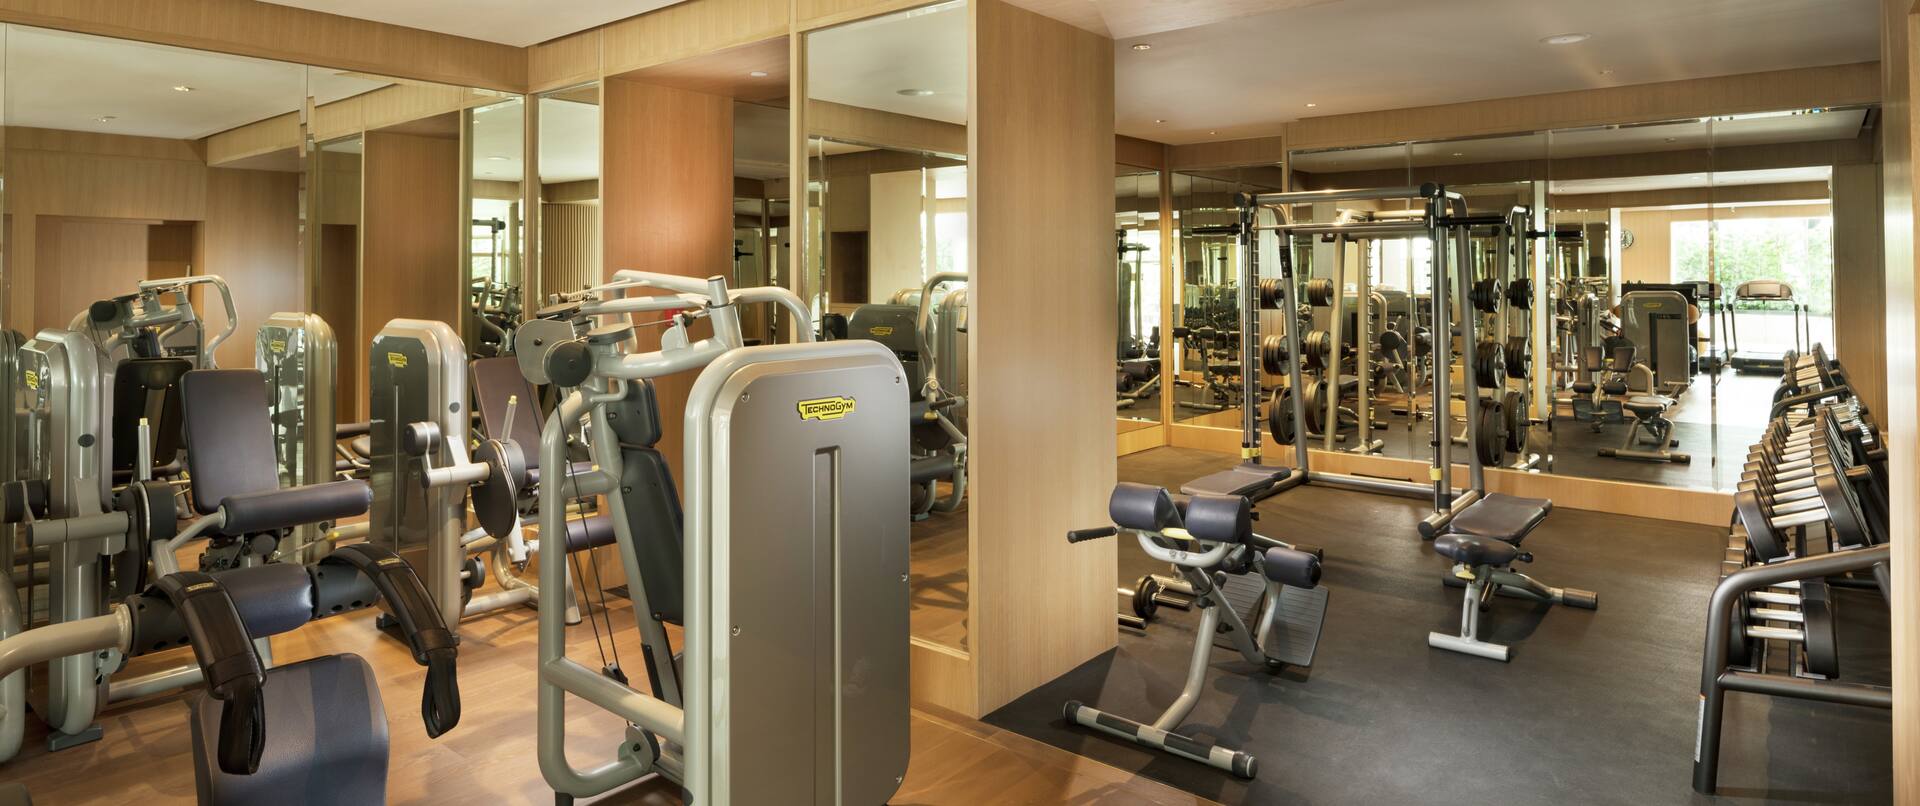 Interior View of Fitness Facilities